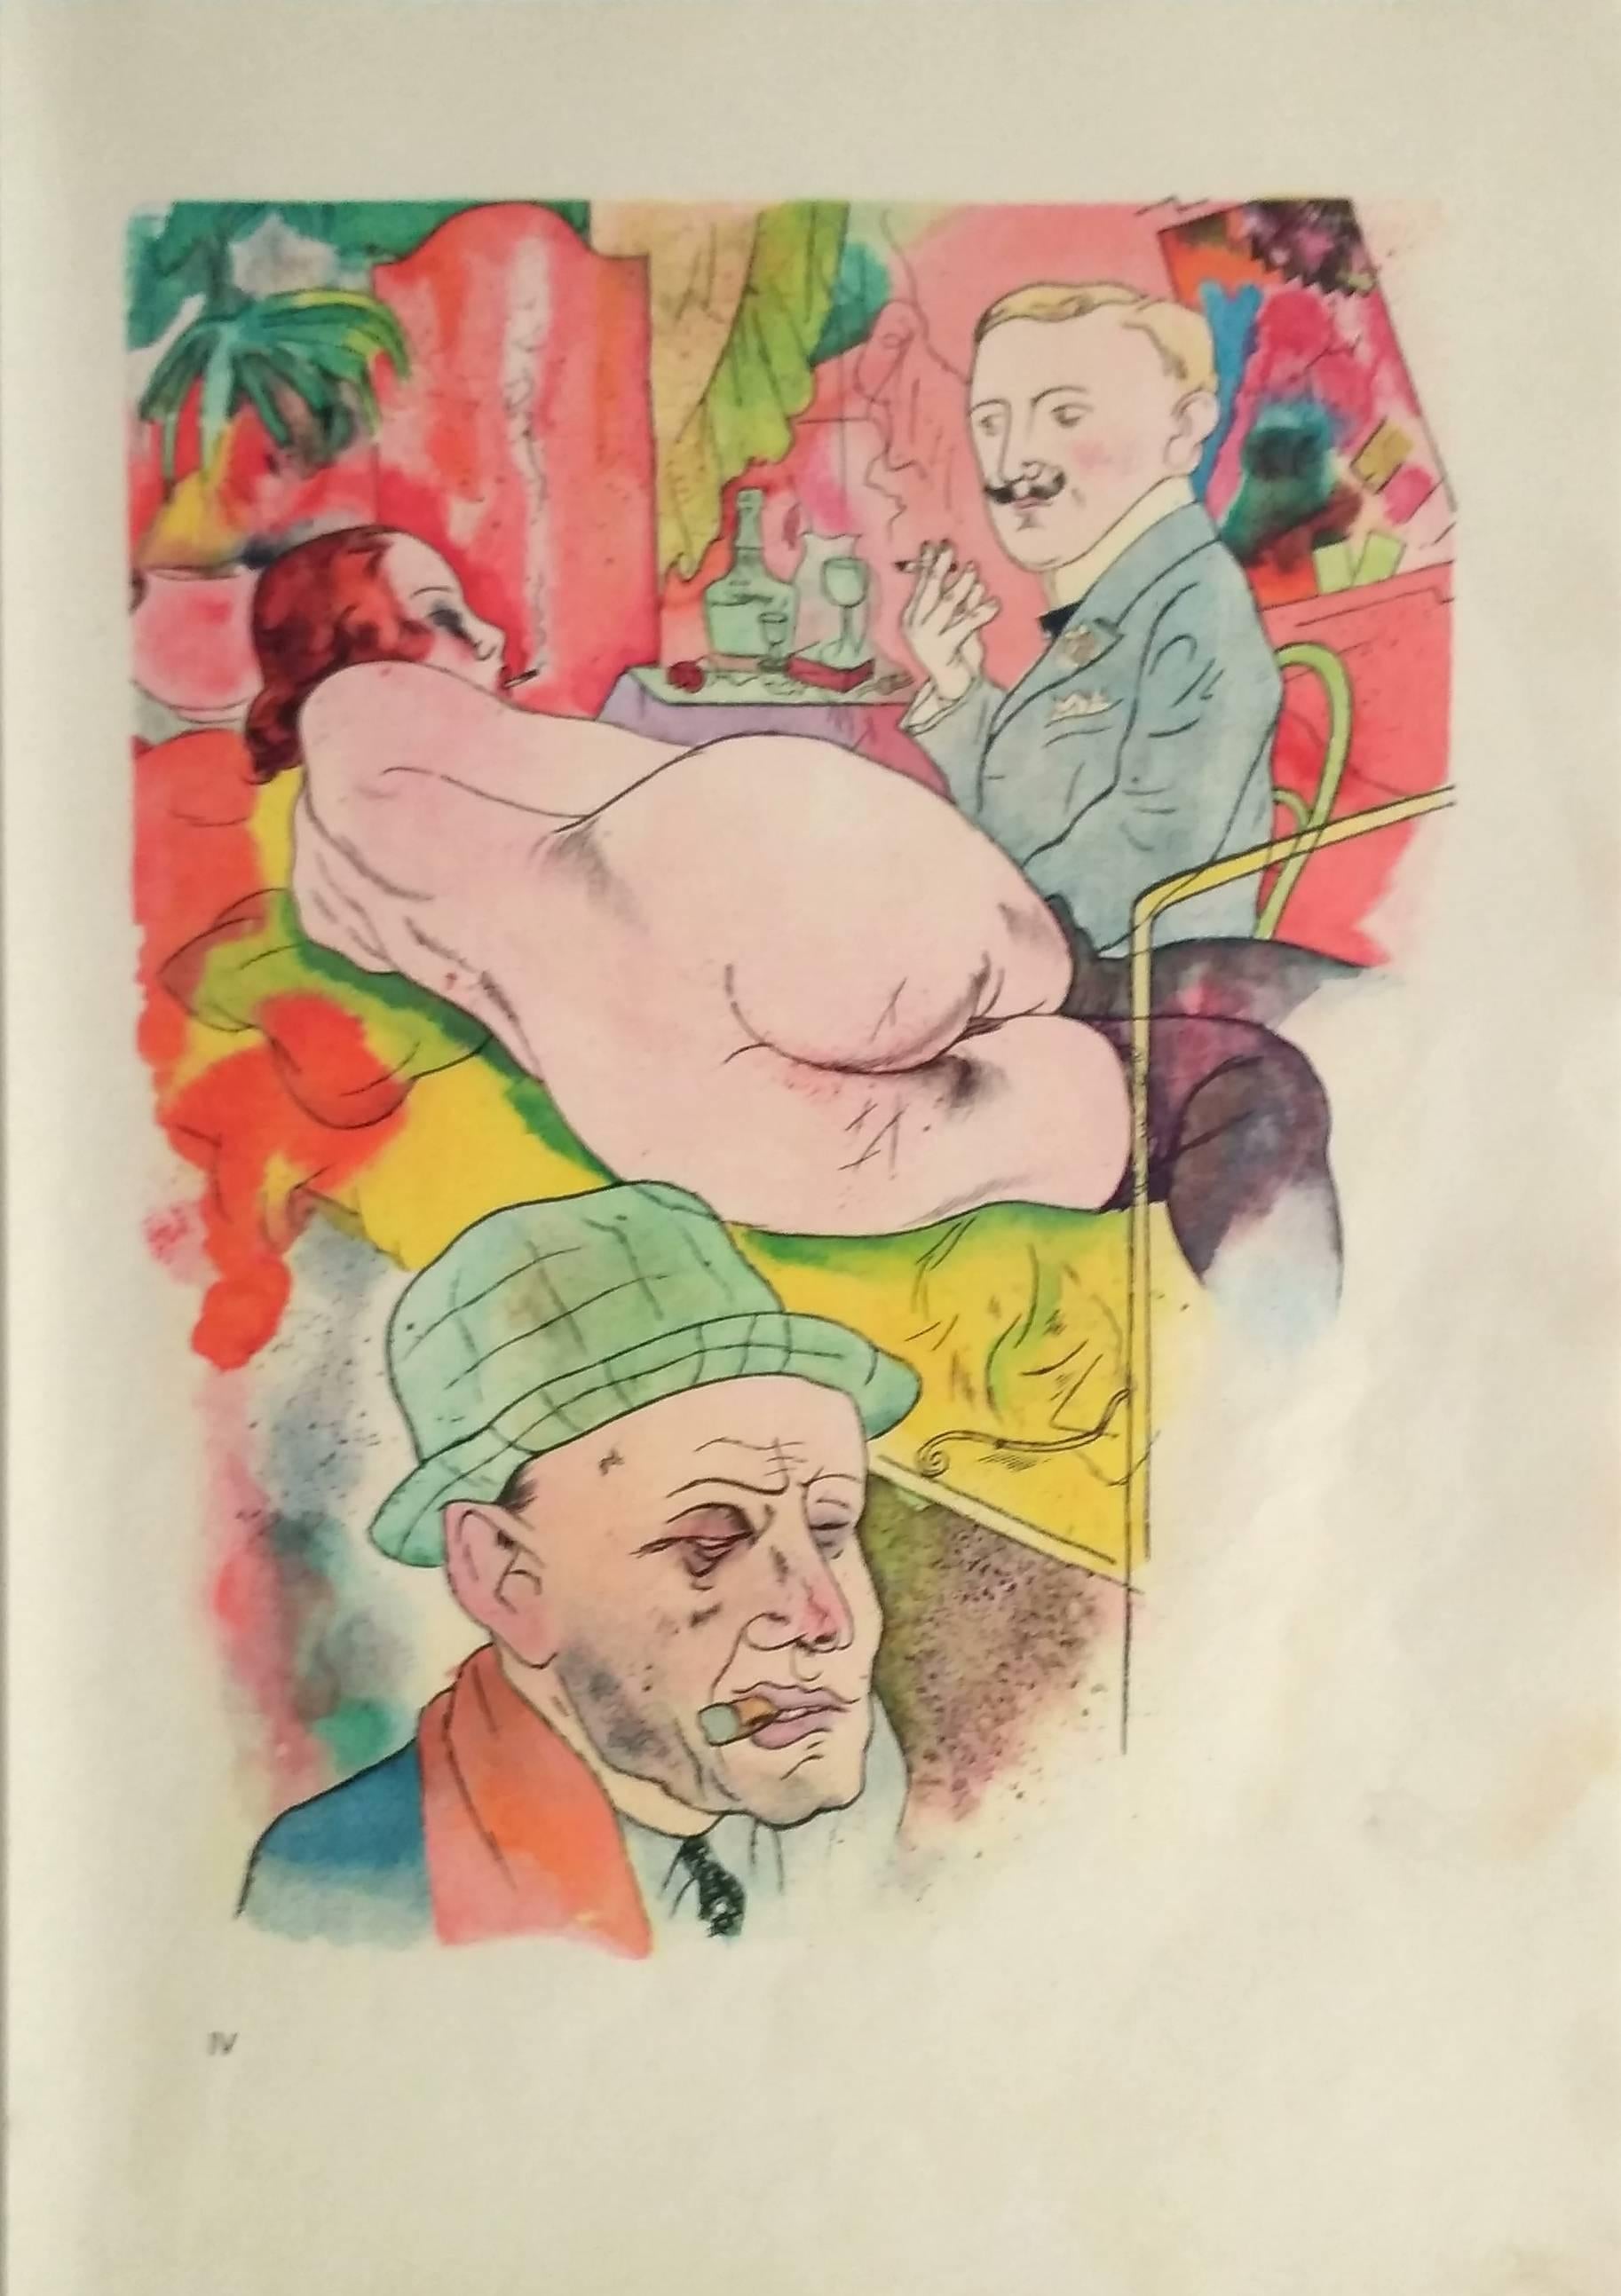 Color Lithograph on handmade paper from Ecce Homo, by George Grosz, 1921. Printed by Kunstanstalt Dr. Selle & Co. AG, Berlin. Published by Malik Verlag, 1923. Numbered in Roman numerals lower left. Here number IV. Framed, under museum glass.